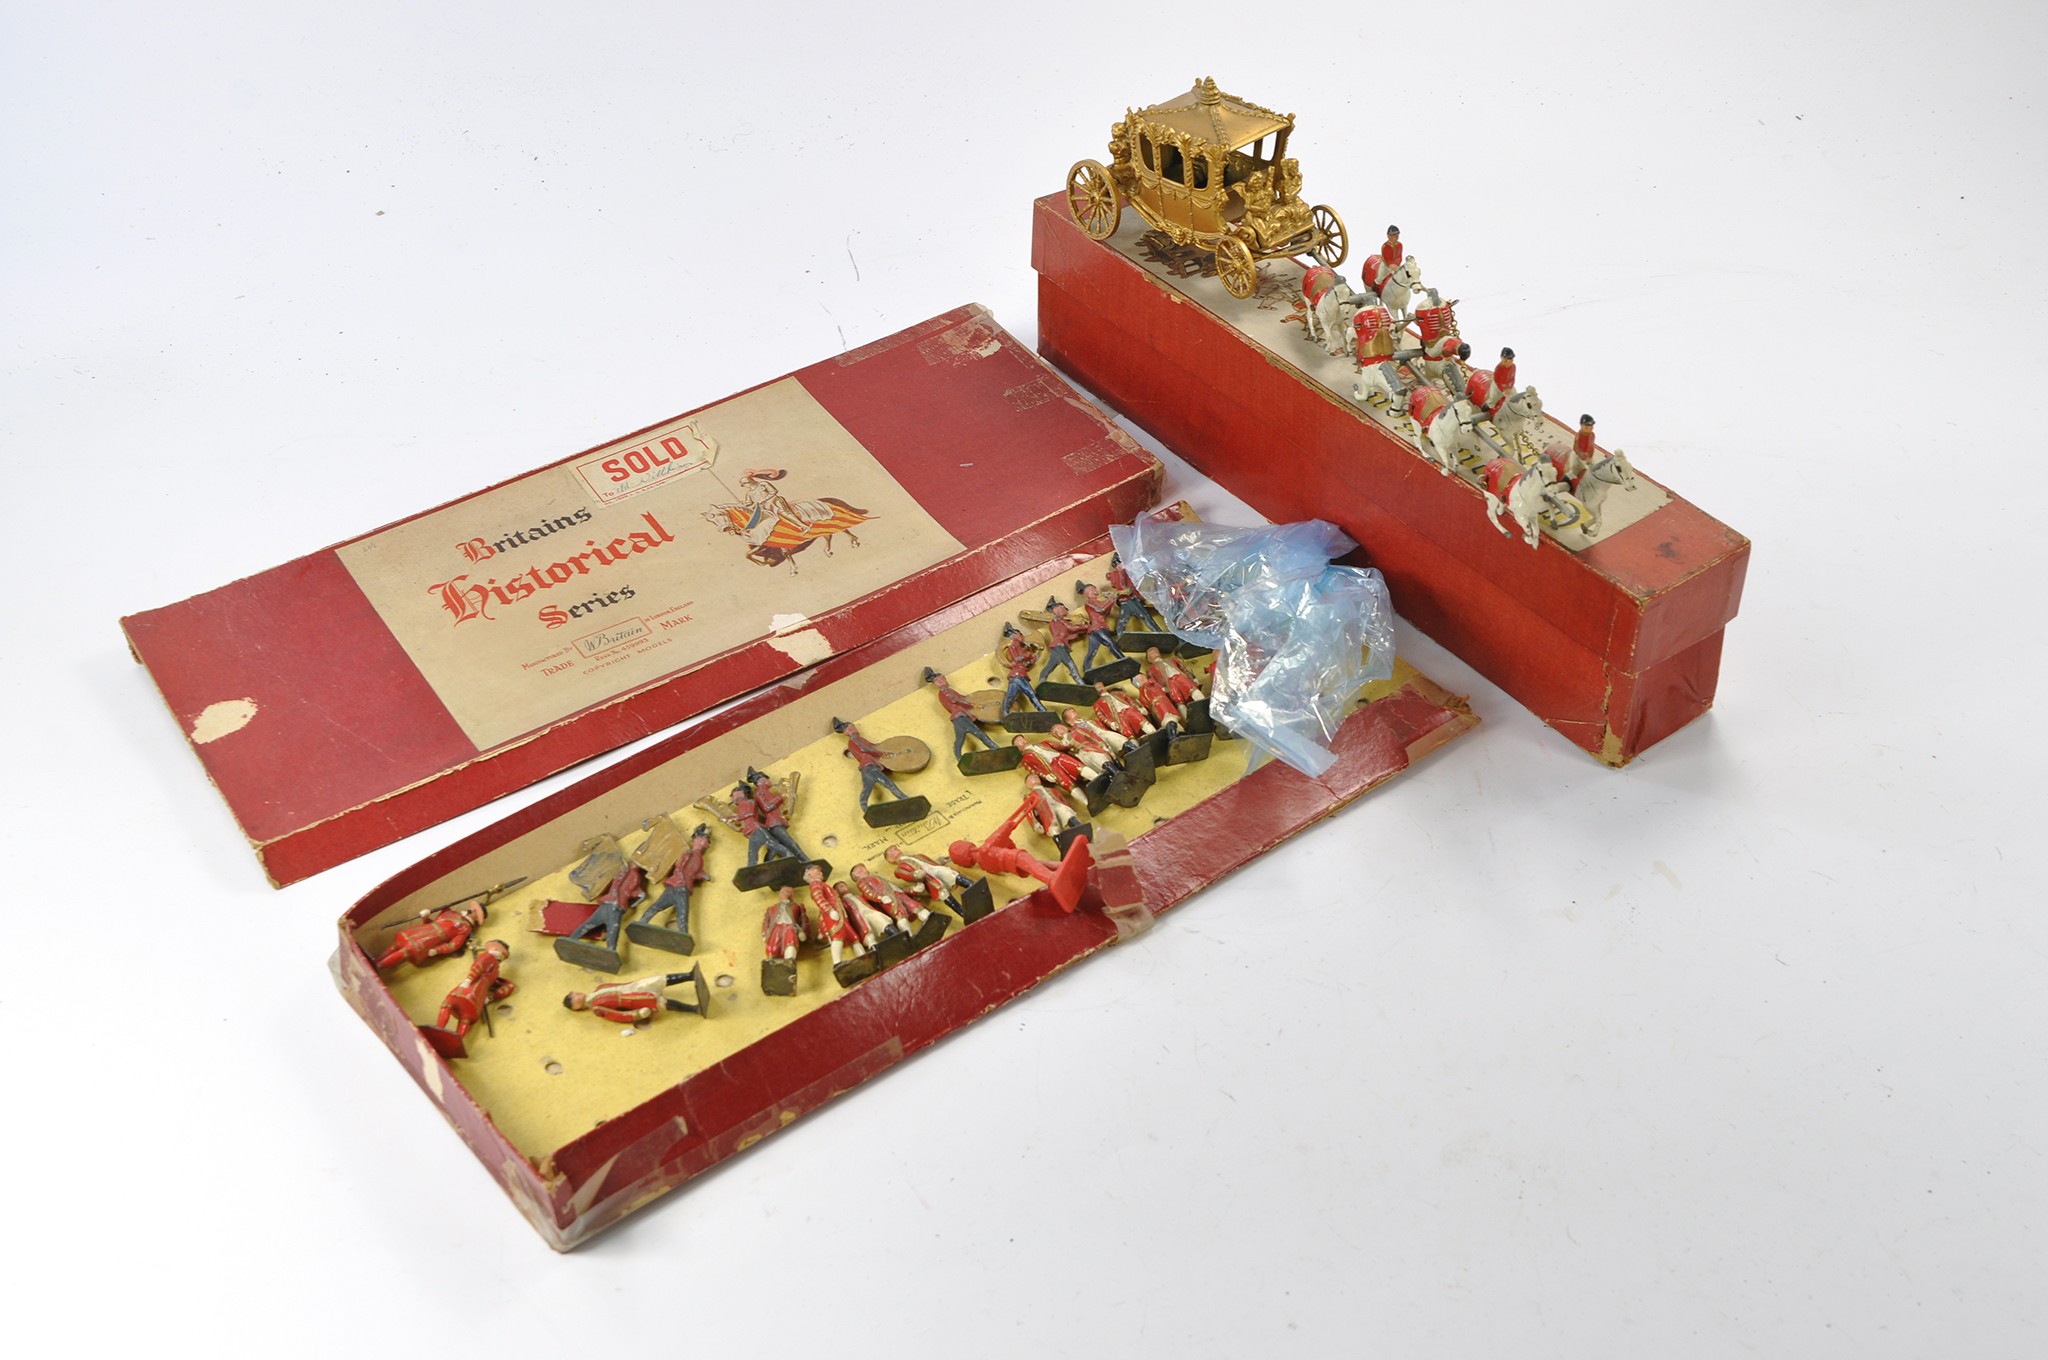 Mostly Britains lead metal soldier sets including State Coach. Fair only.